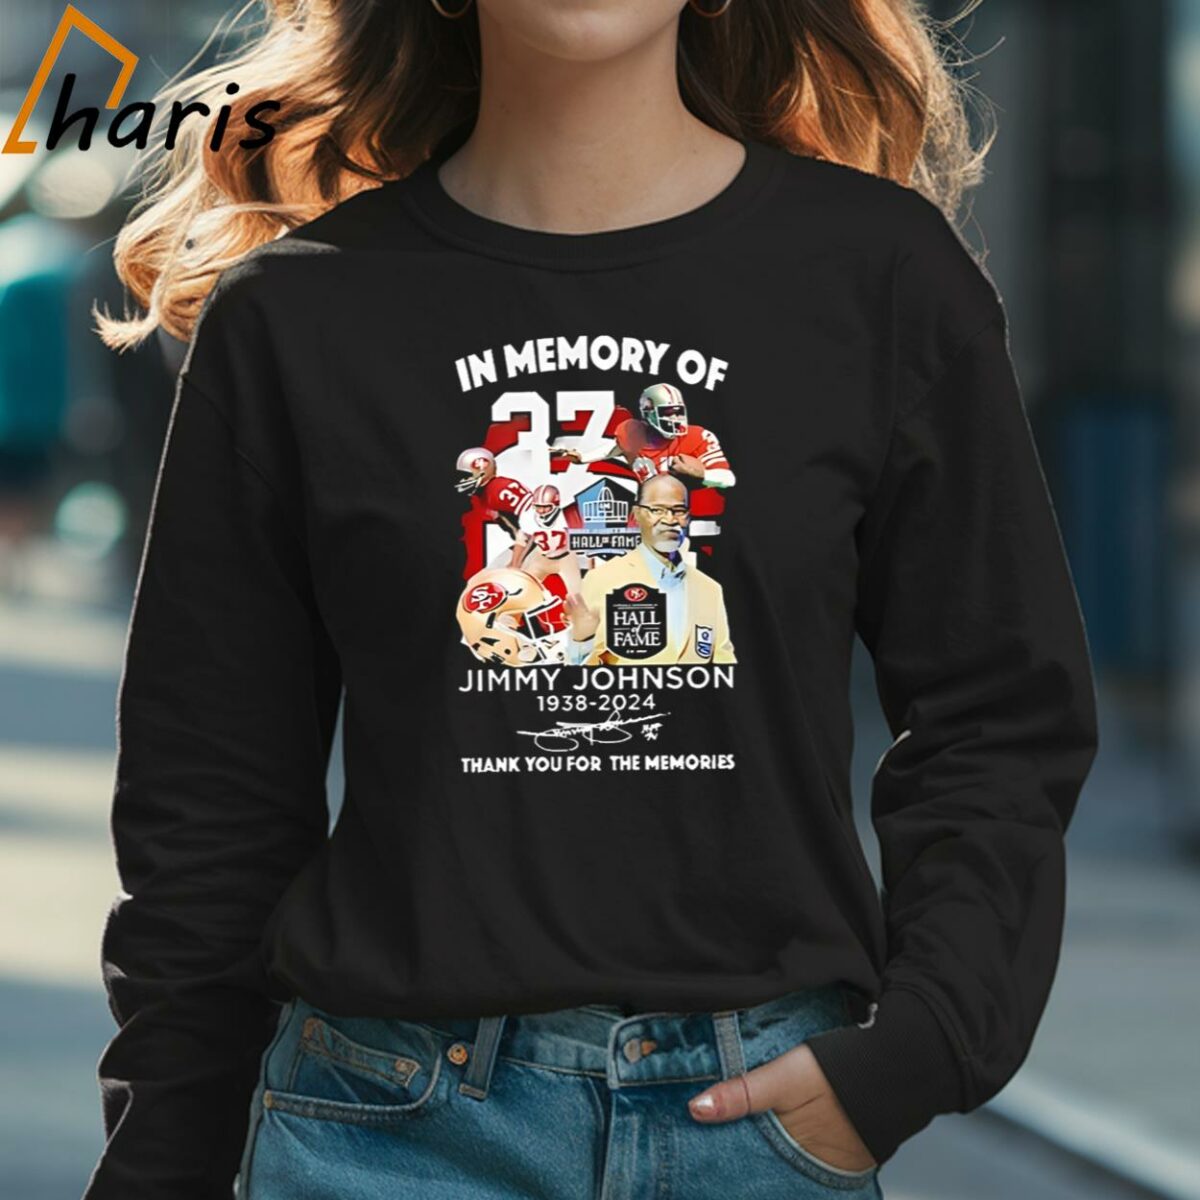 In Memory Of Jimmy Johnson 1938 2024 Thank You For The Memories Signature Shirt 3 Long sleeve shirt